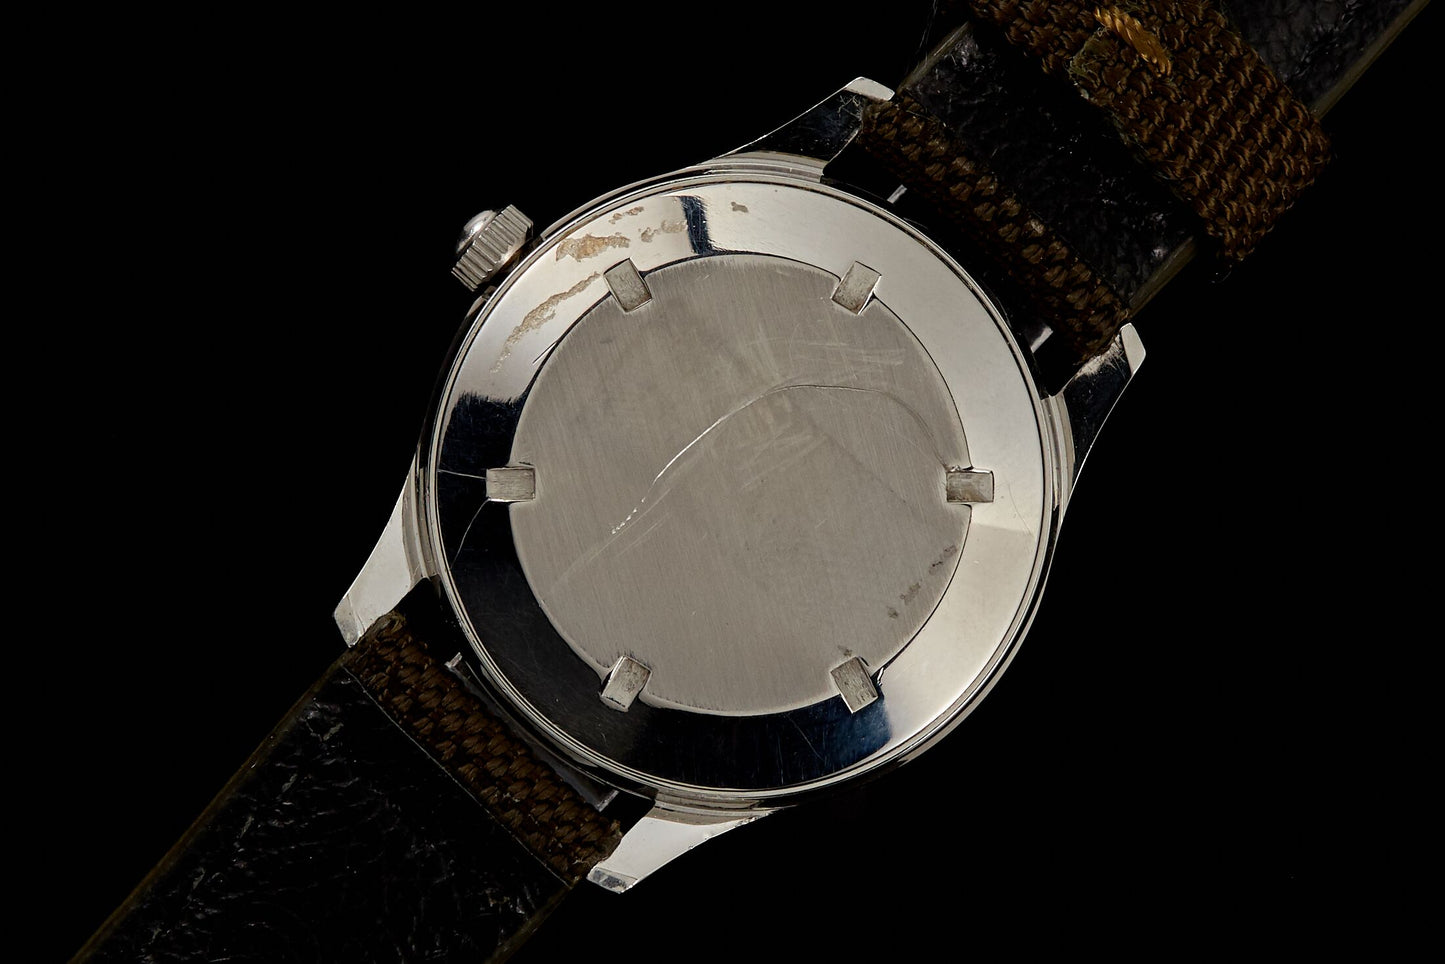 Wittnauer Gent's Automatic